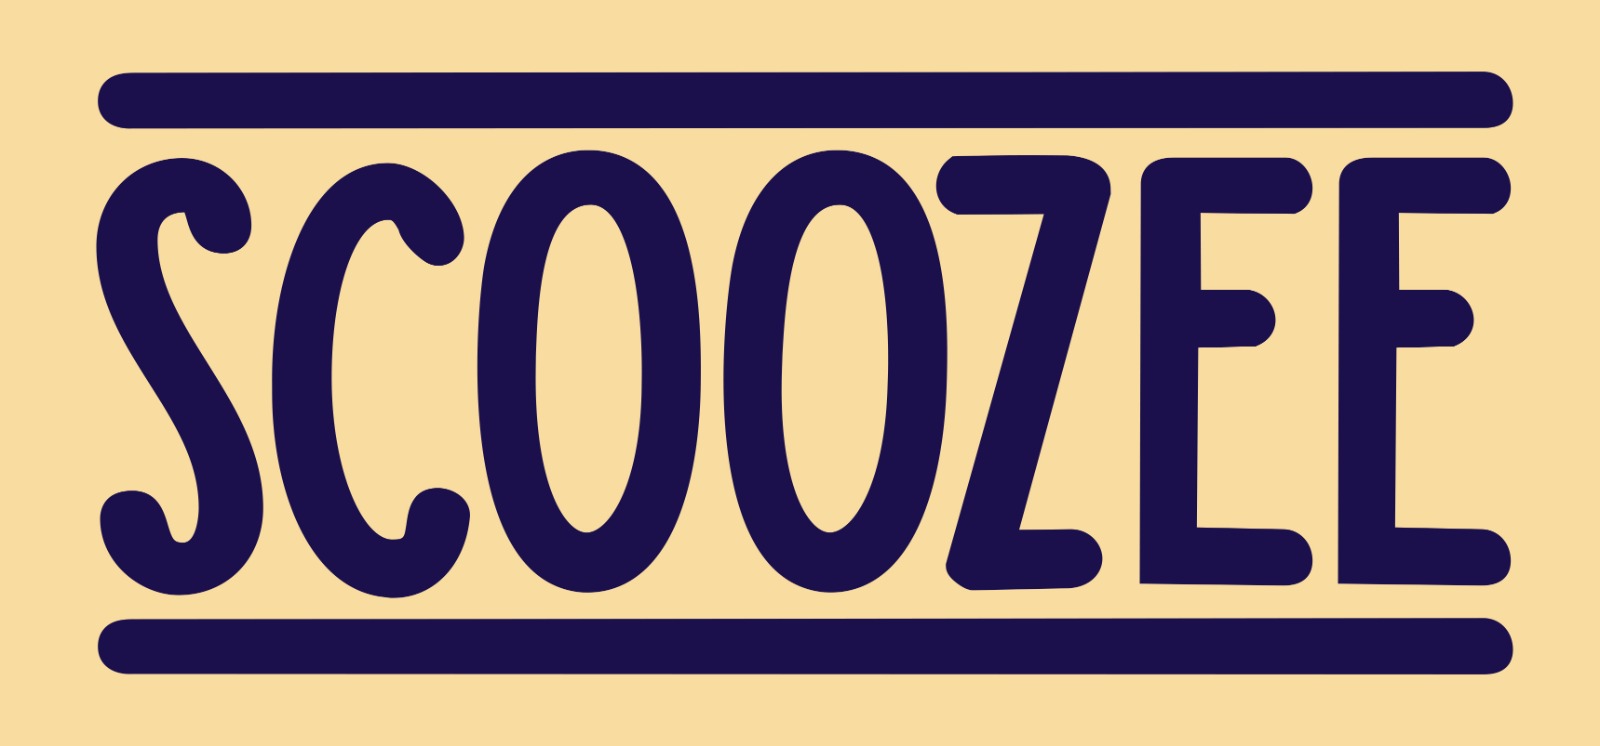 Drinking Glasses – Scoozee